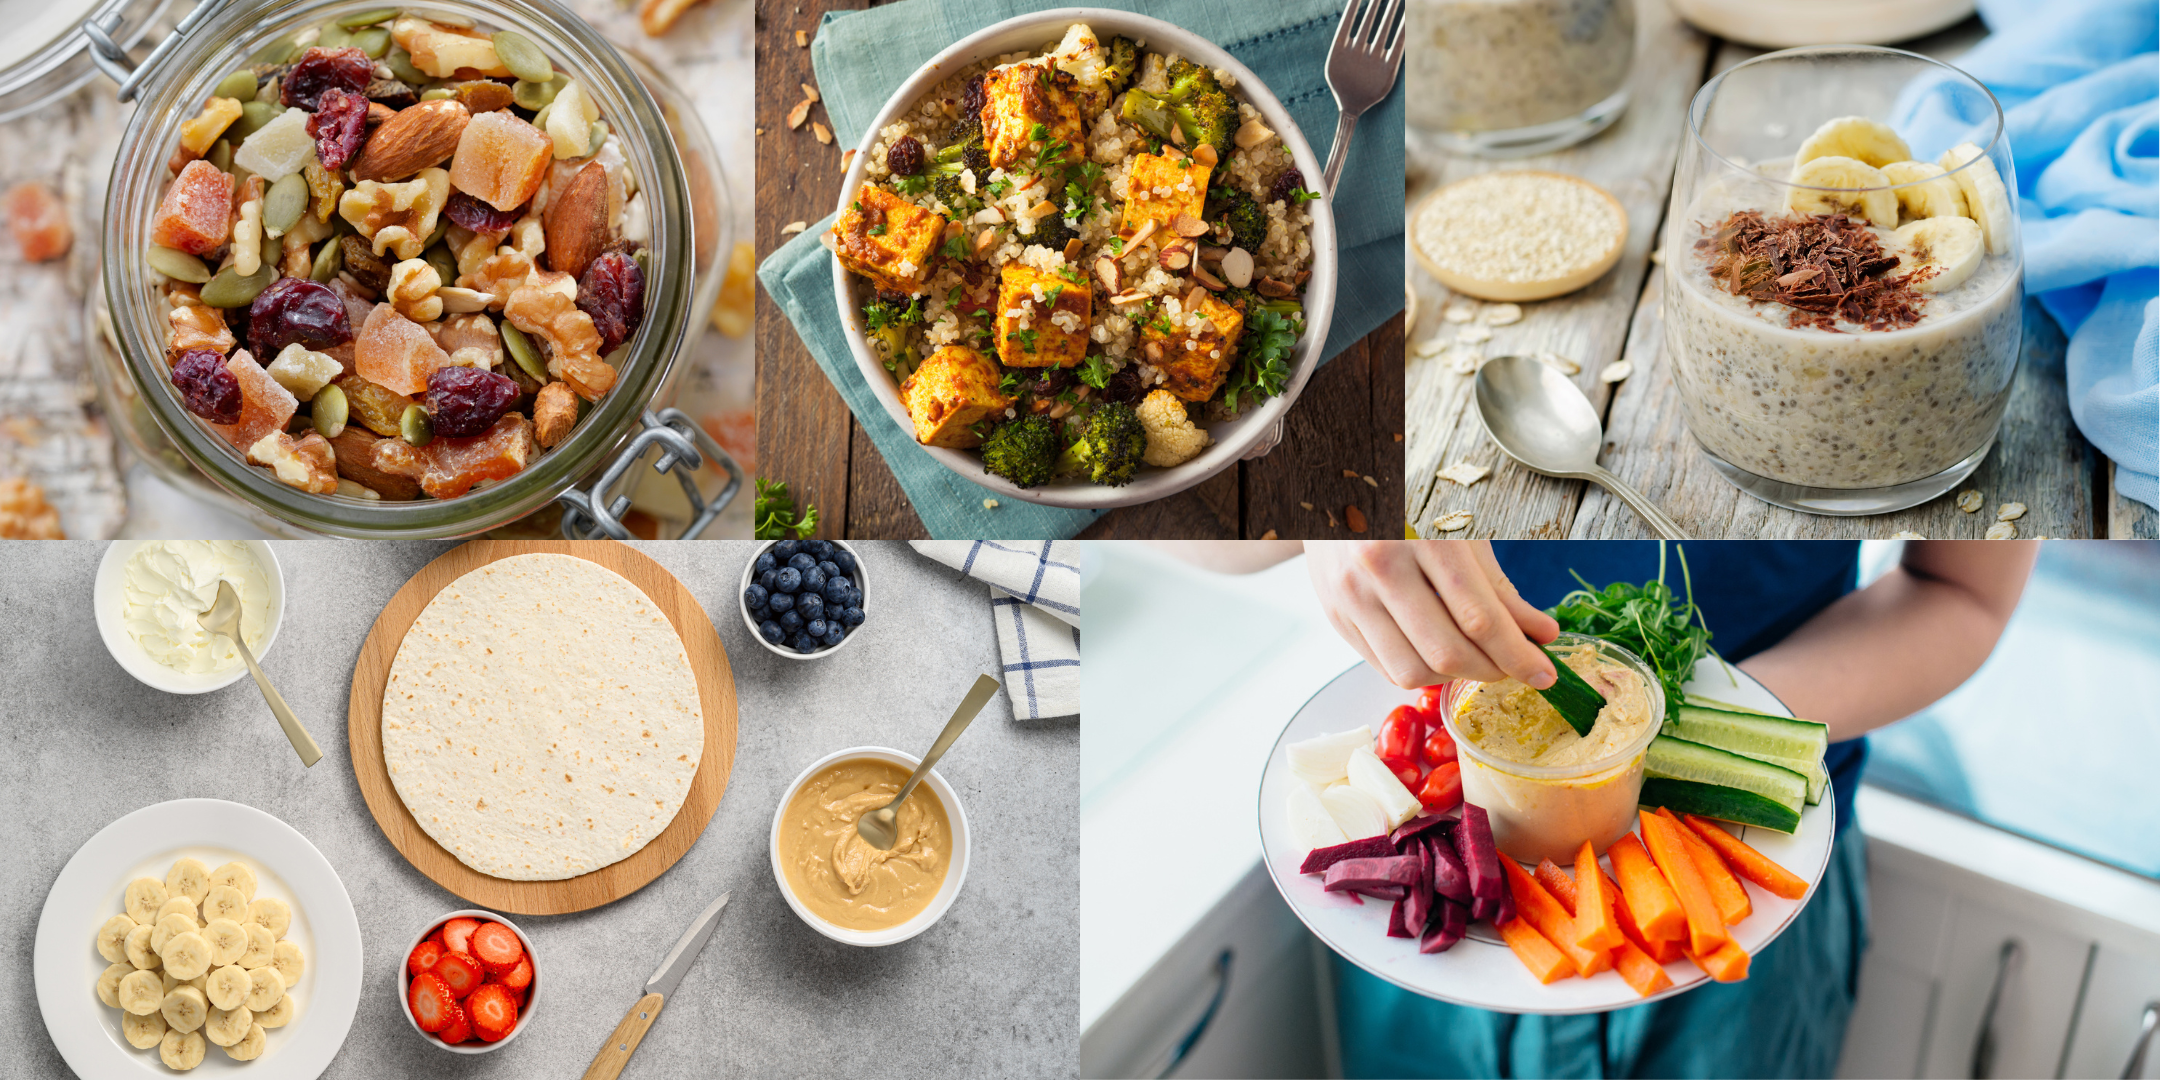 Five photos collaged together, showing different vegan snacks: trial mix, quinoa bowl, nut butter and banana wrap, veggies with hummus, and chia pudding.